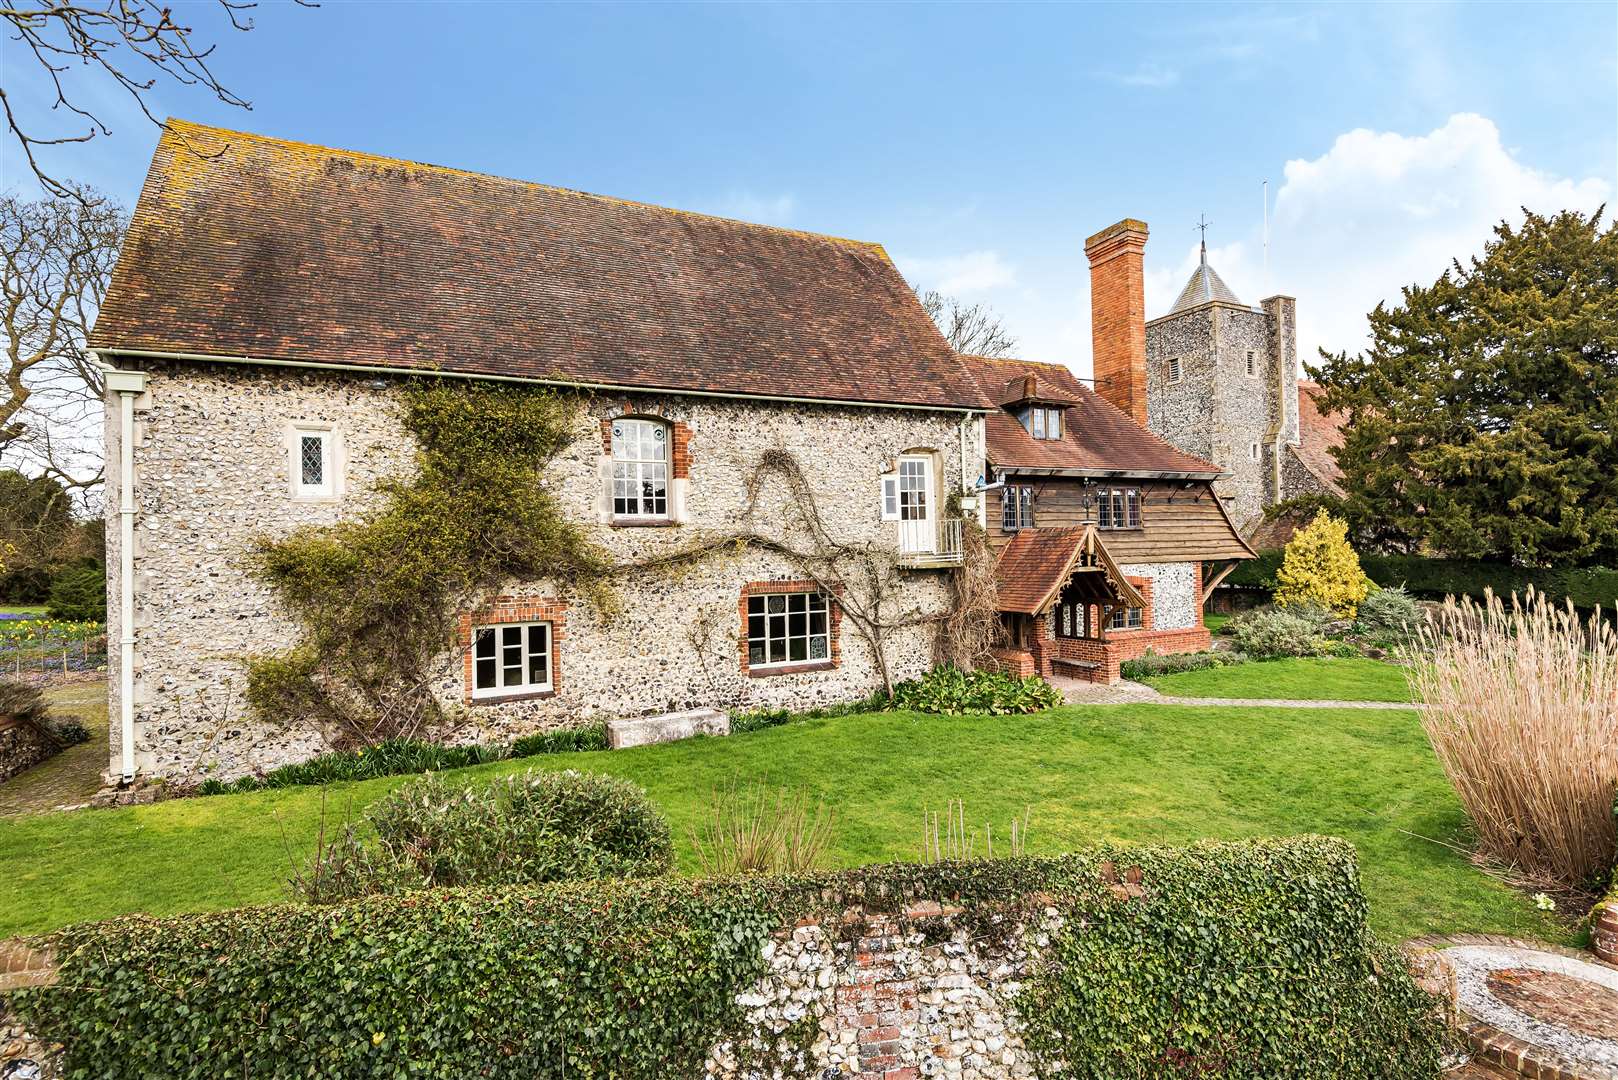 The flint and stone built home also has spectacular, far reaching views across the Kentish countryside. Photo Savills.